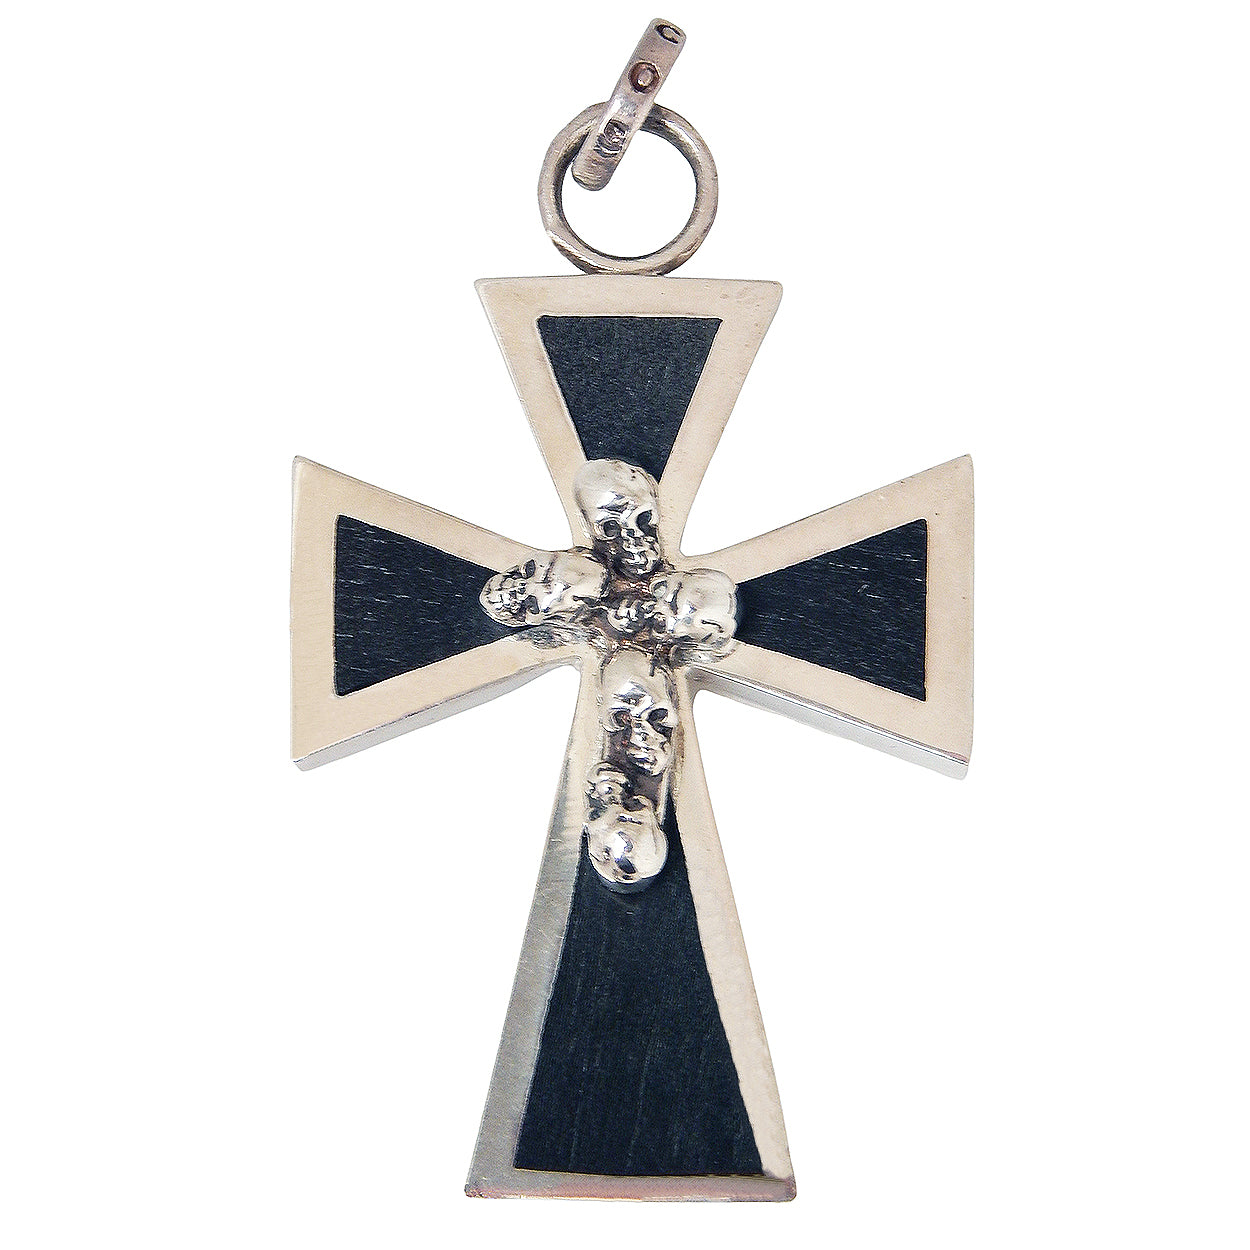 MARCOS - &quot;MULTI-MINI SKULL CROSS&quot; Pendant in Sterling Silver with inlaid Ebony Wood